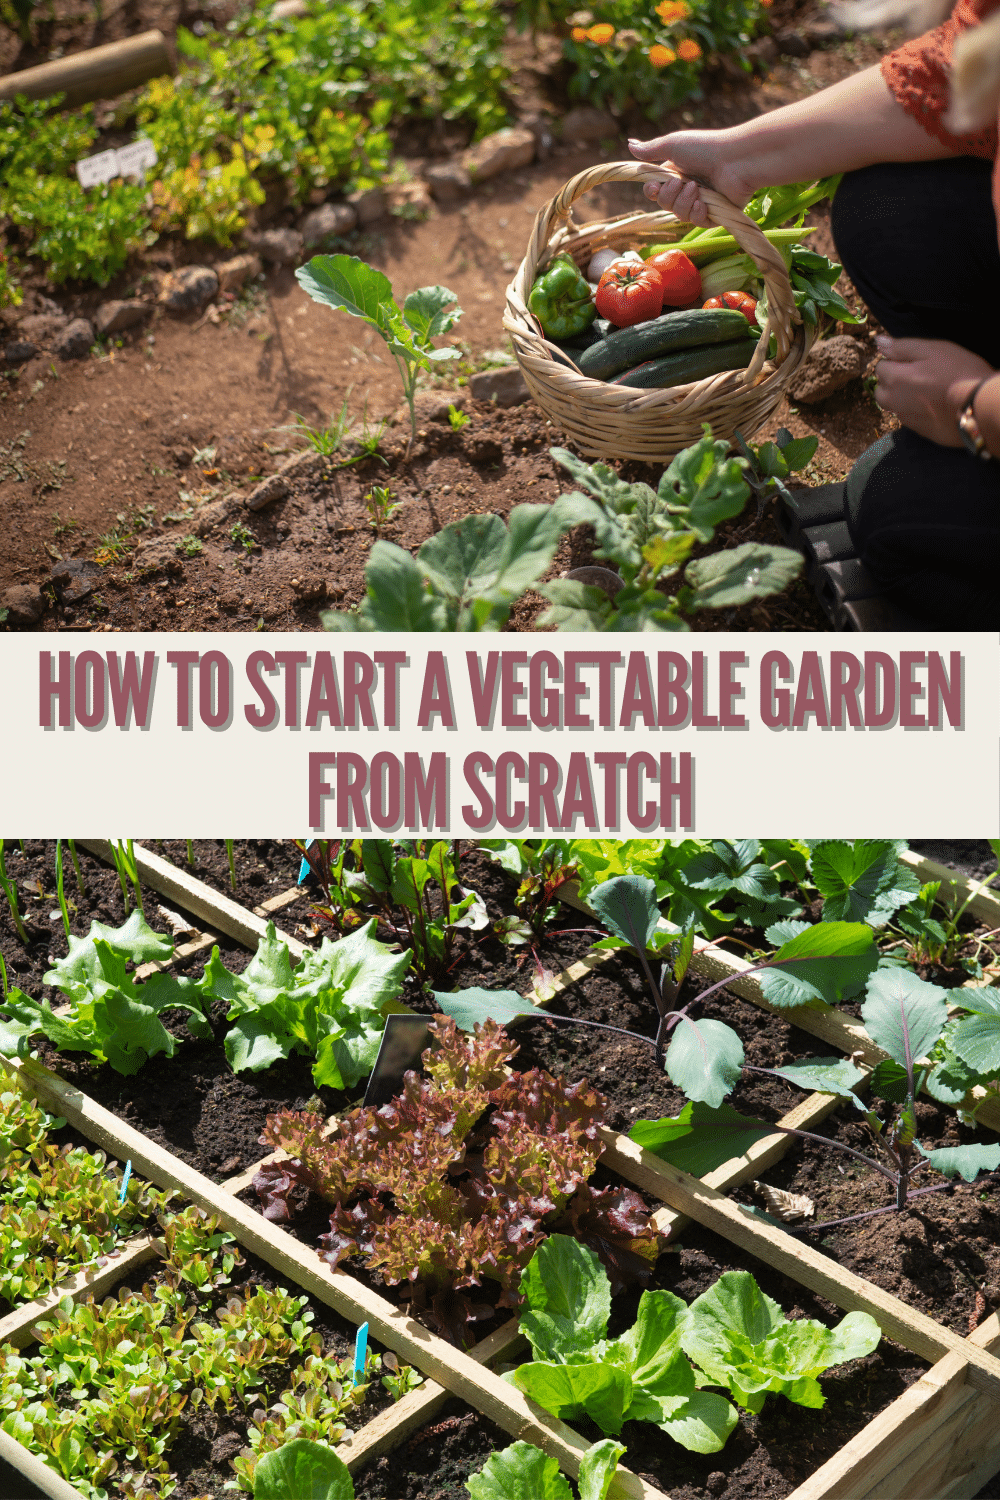 If you're looking for how to start a vegetable garden, you're in luck! These simple tips will have you growing your own food in no time at all! #gardening #tips #vegetable #greenthumb via @wondermomwannab